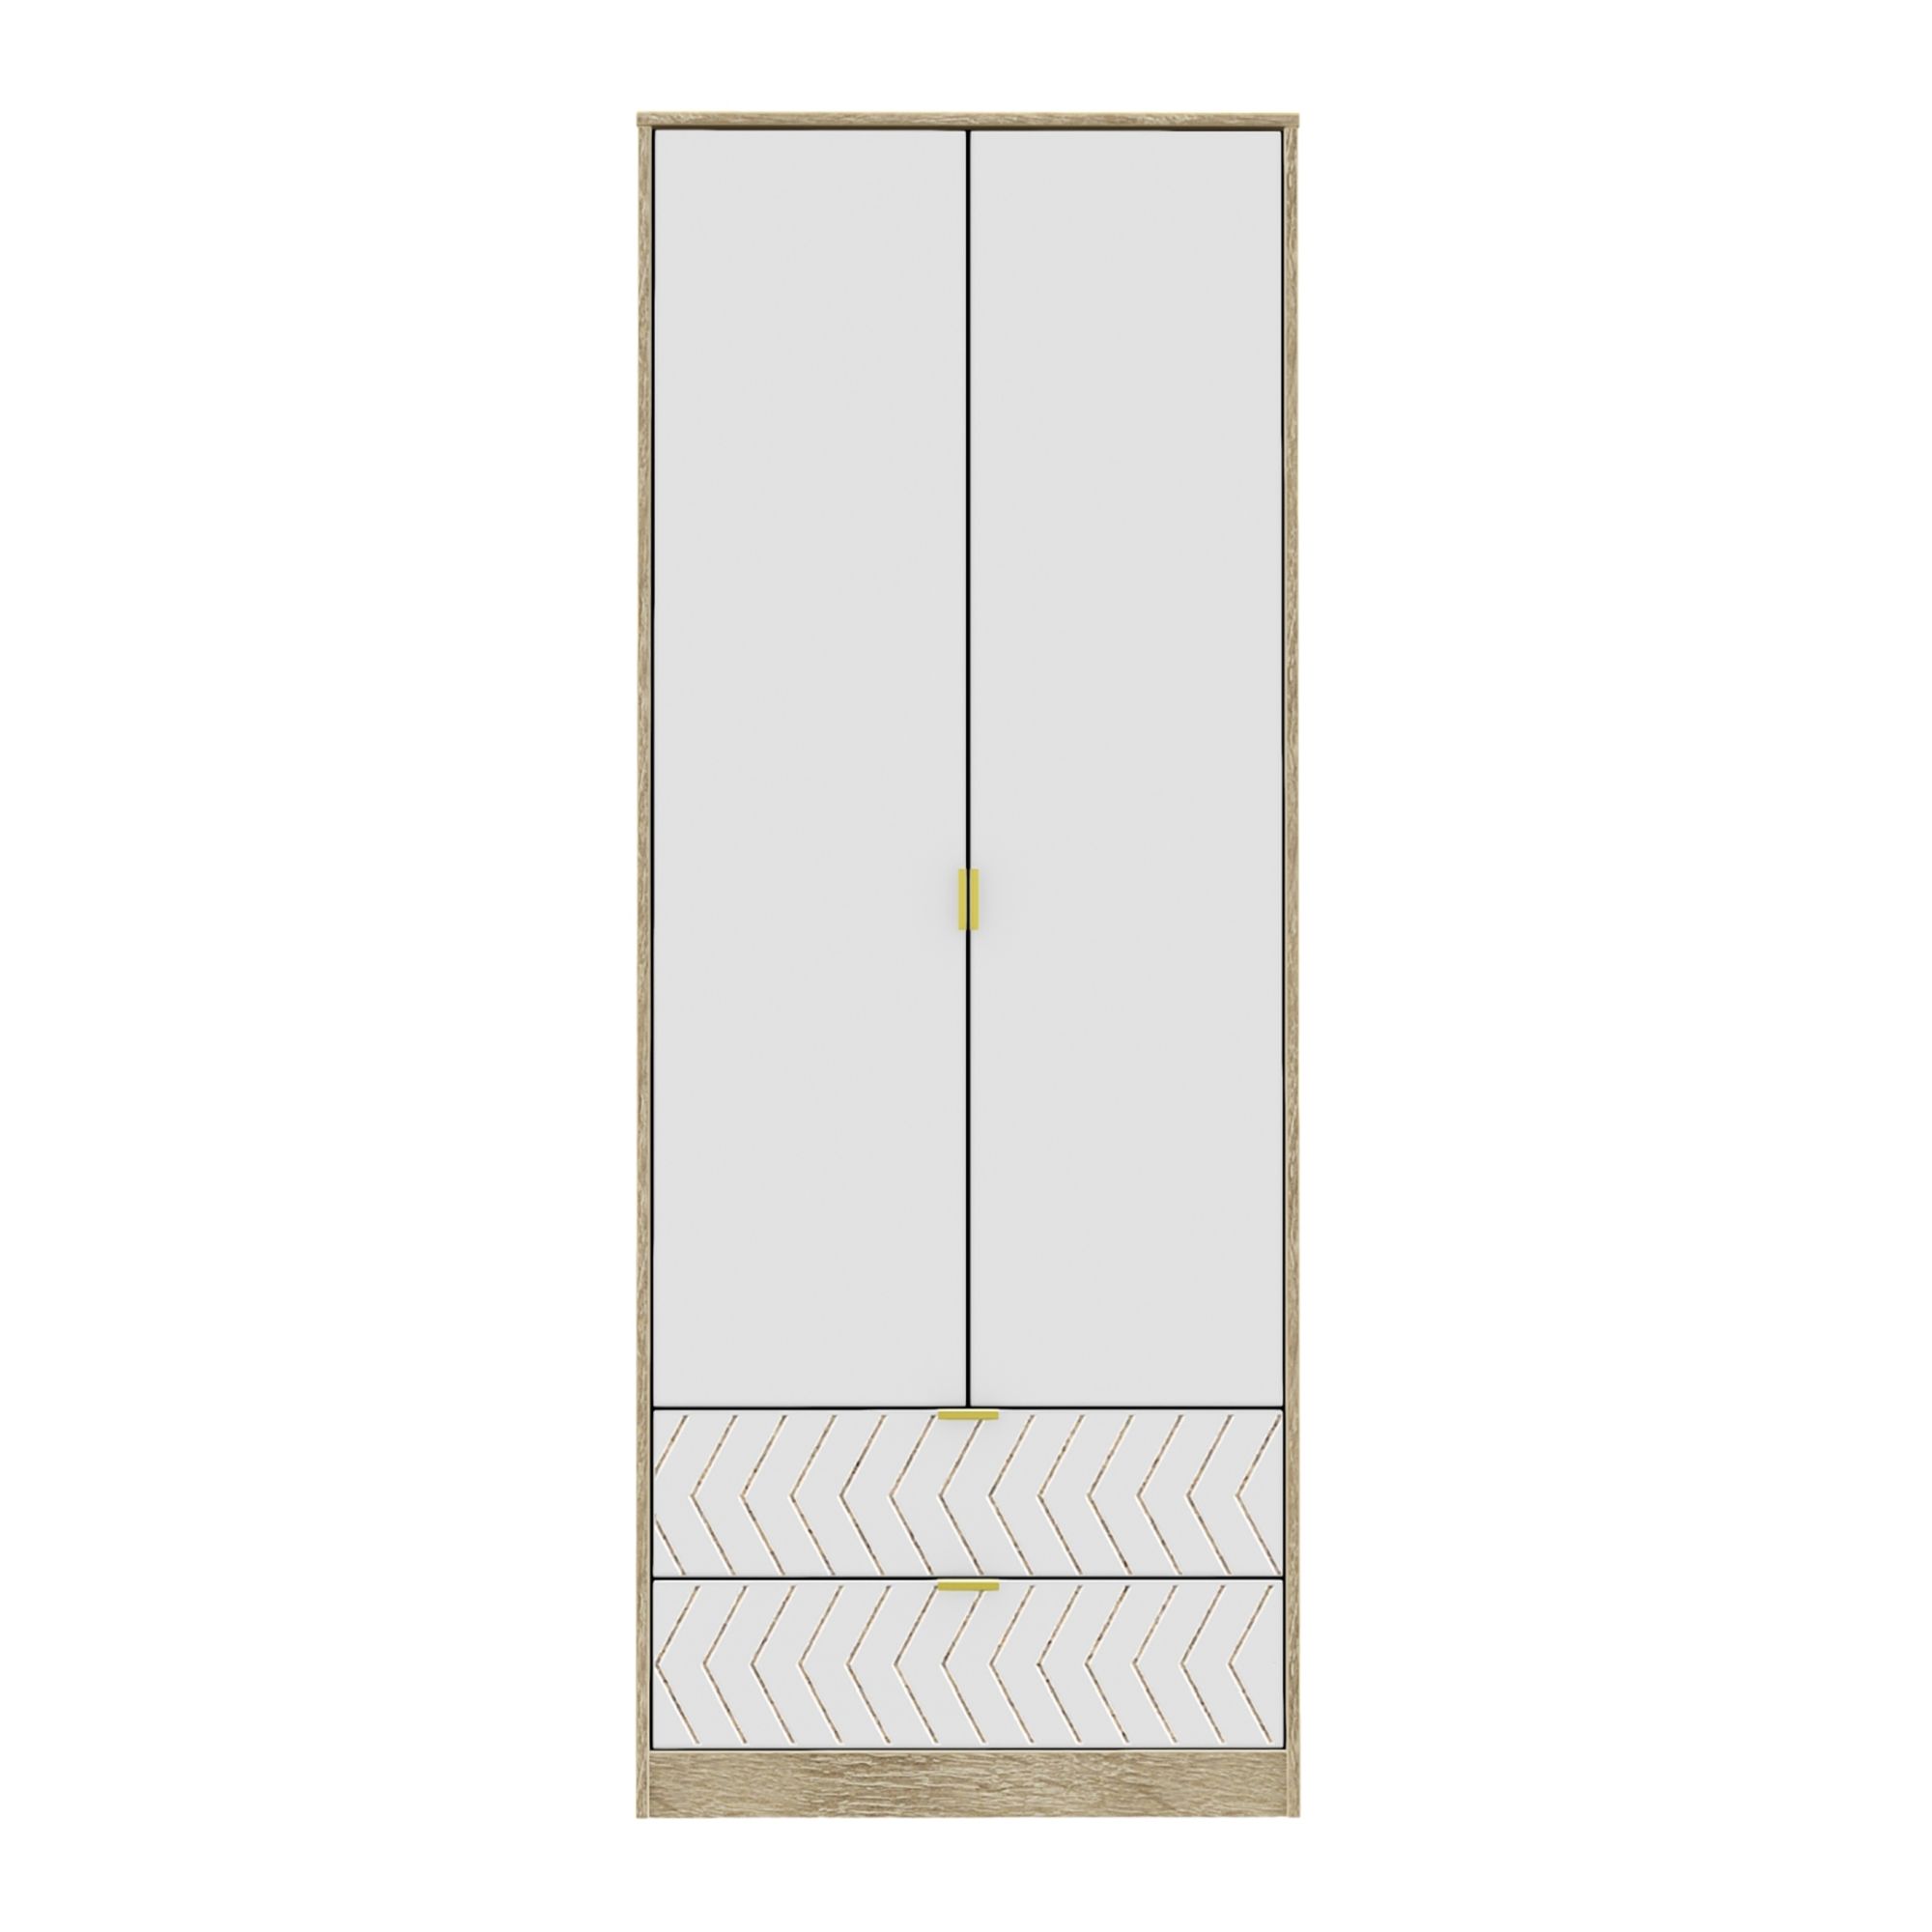 Ready assembled Contemporary White & oak 2 Drawer Double Wardrobe (H)1970mm (W)740mm (D)530mm